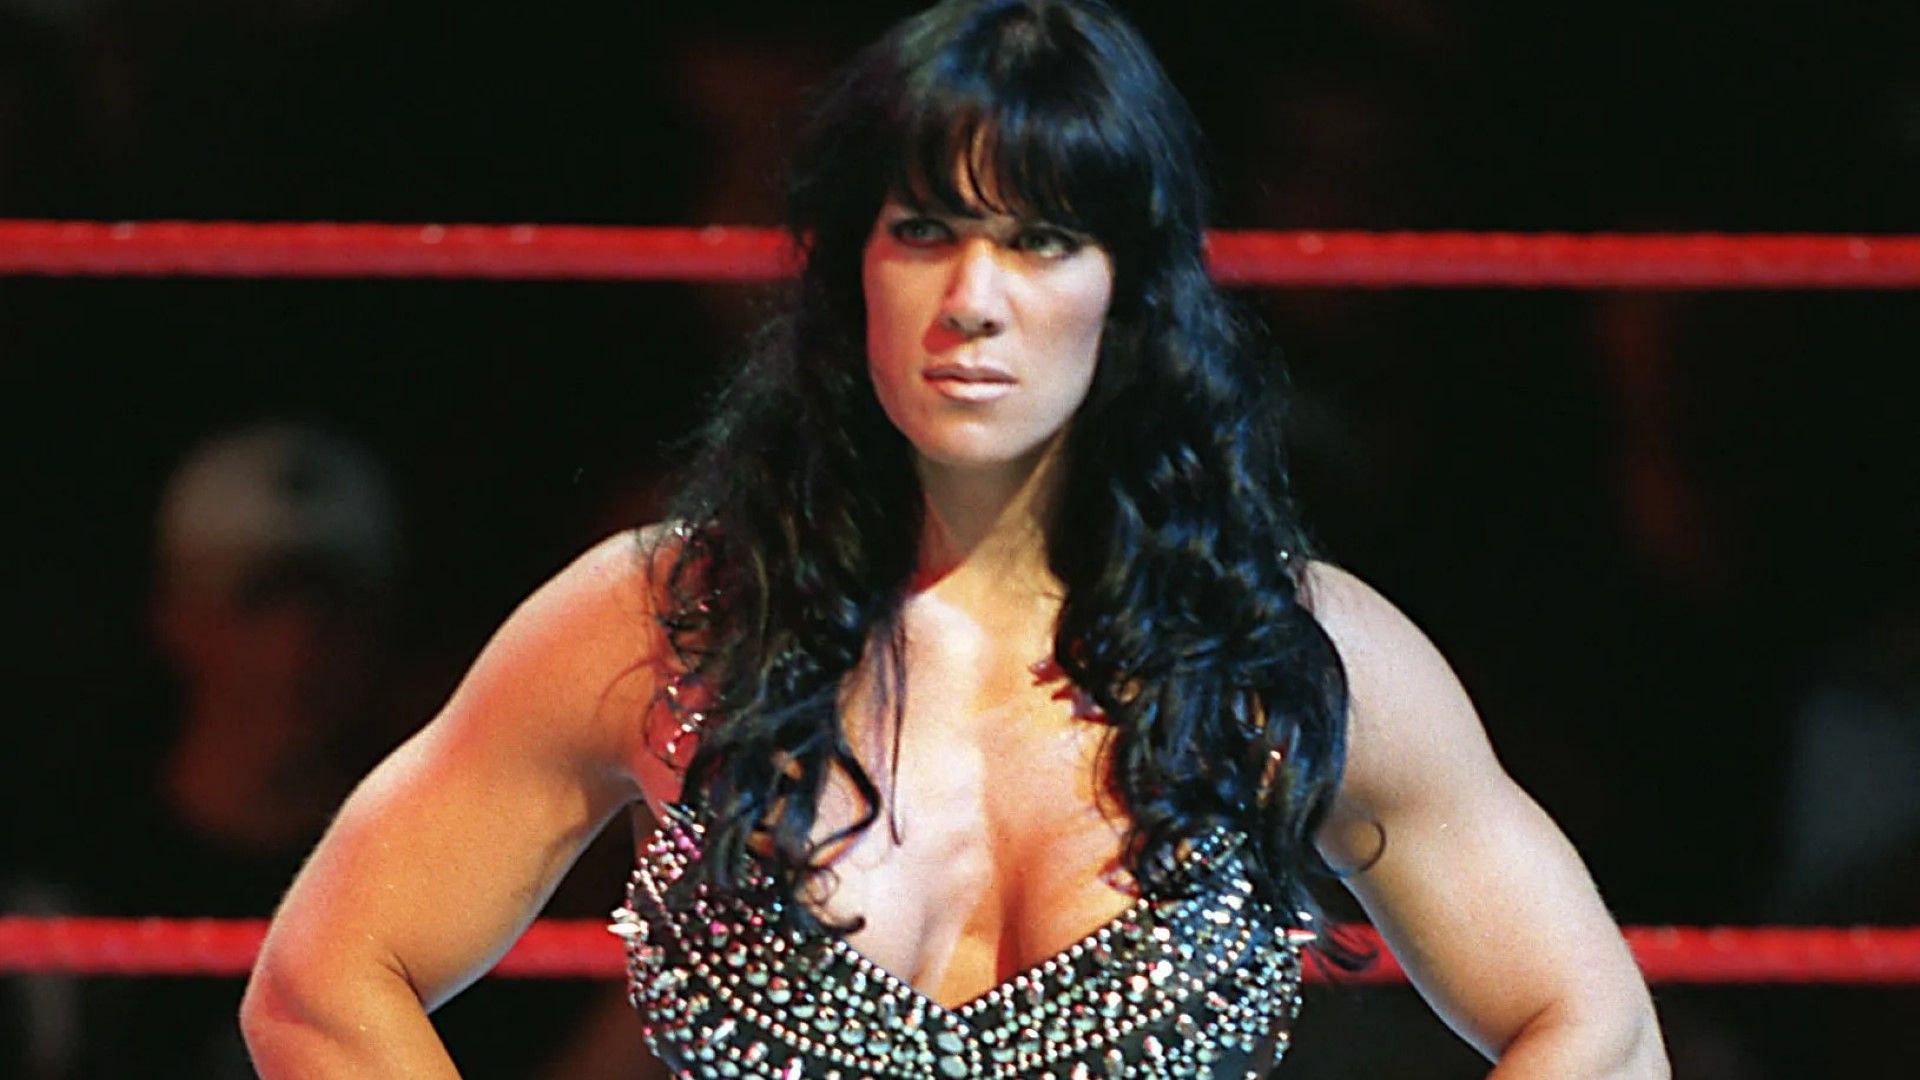 WWE Hall of Famer Chyna poses in the ring